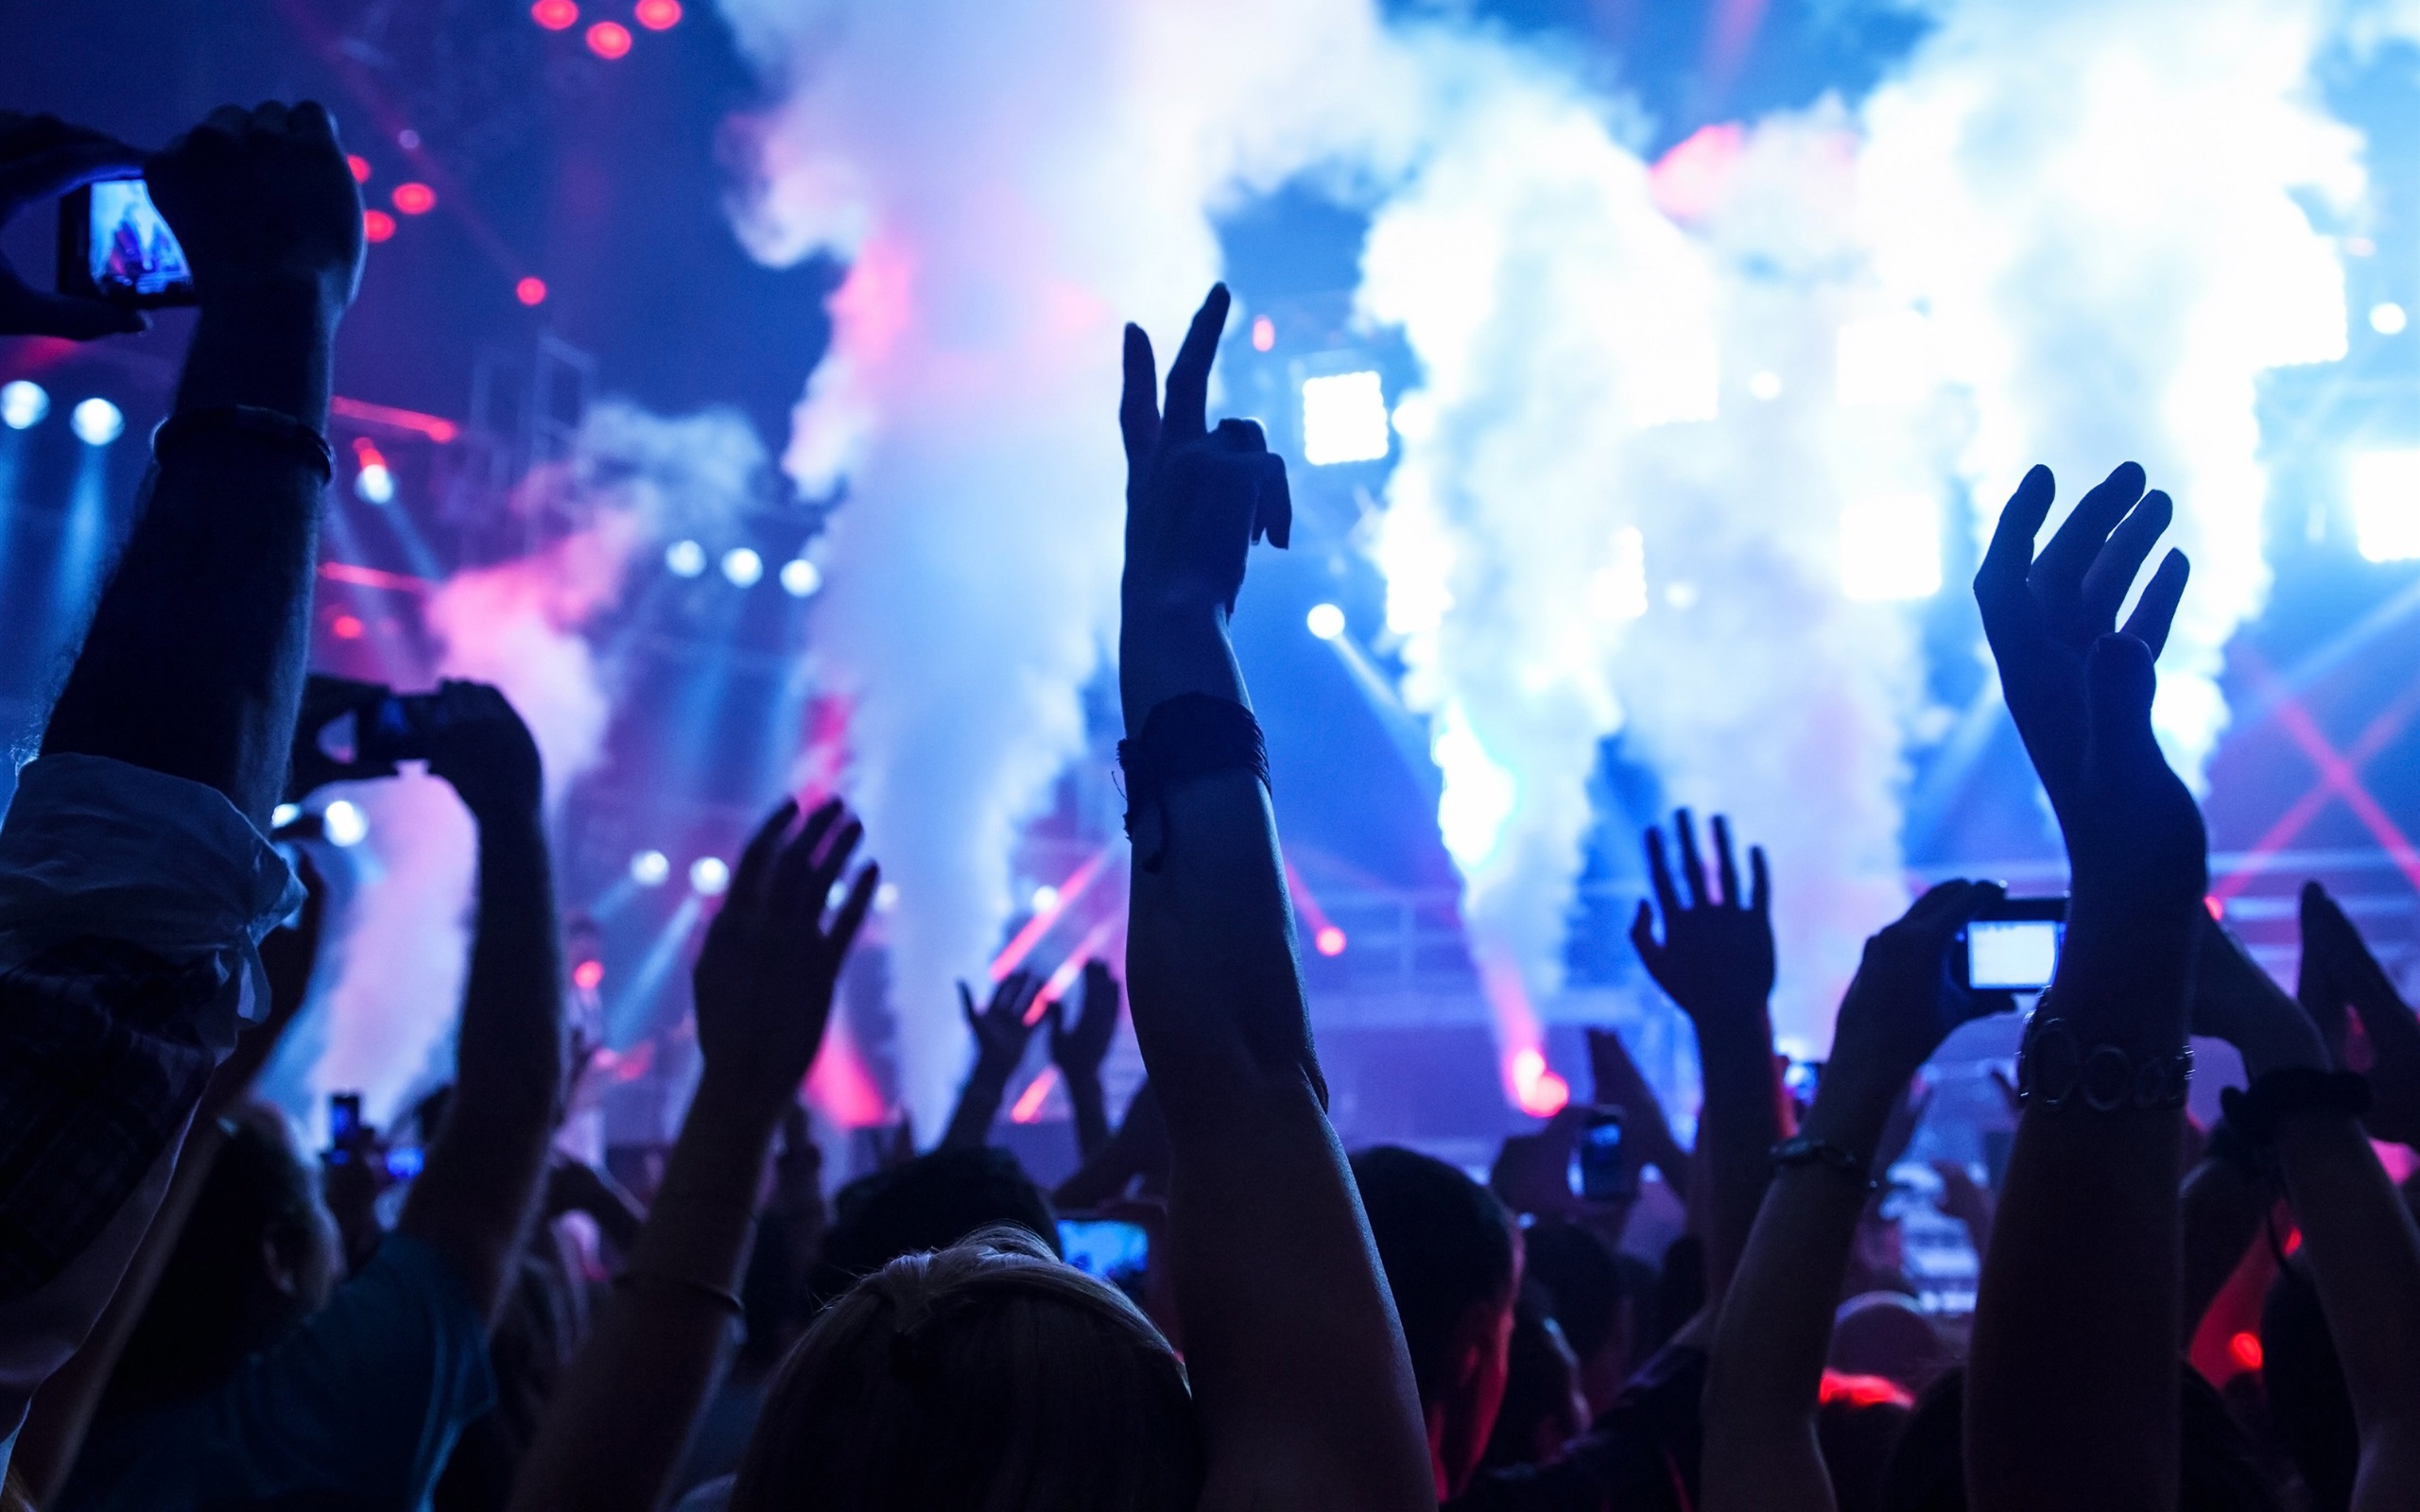 Wallpaper Stage, party, electronica, smoke, people 3840x2160 UHD 4K Picture, Image